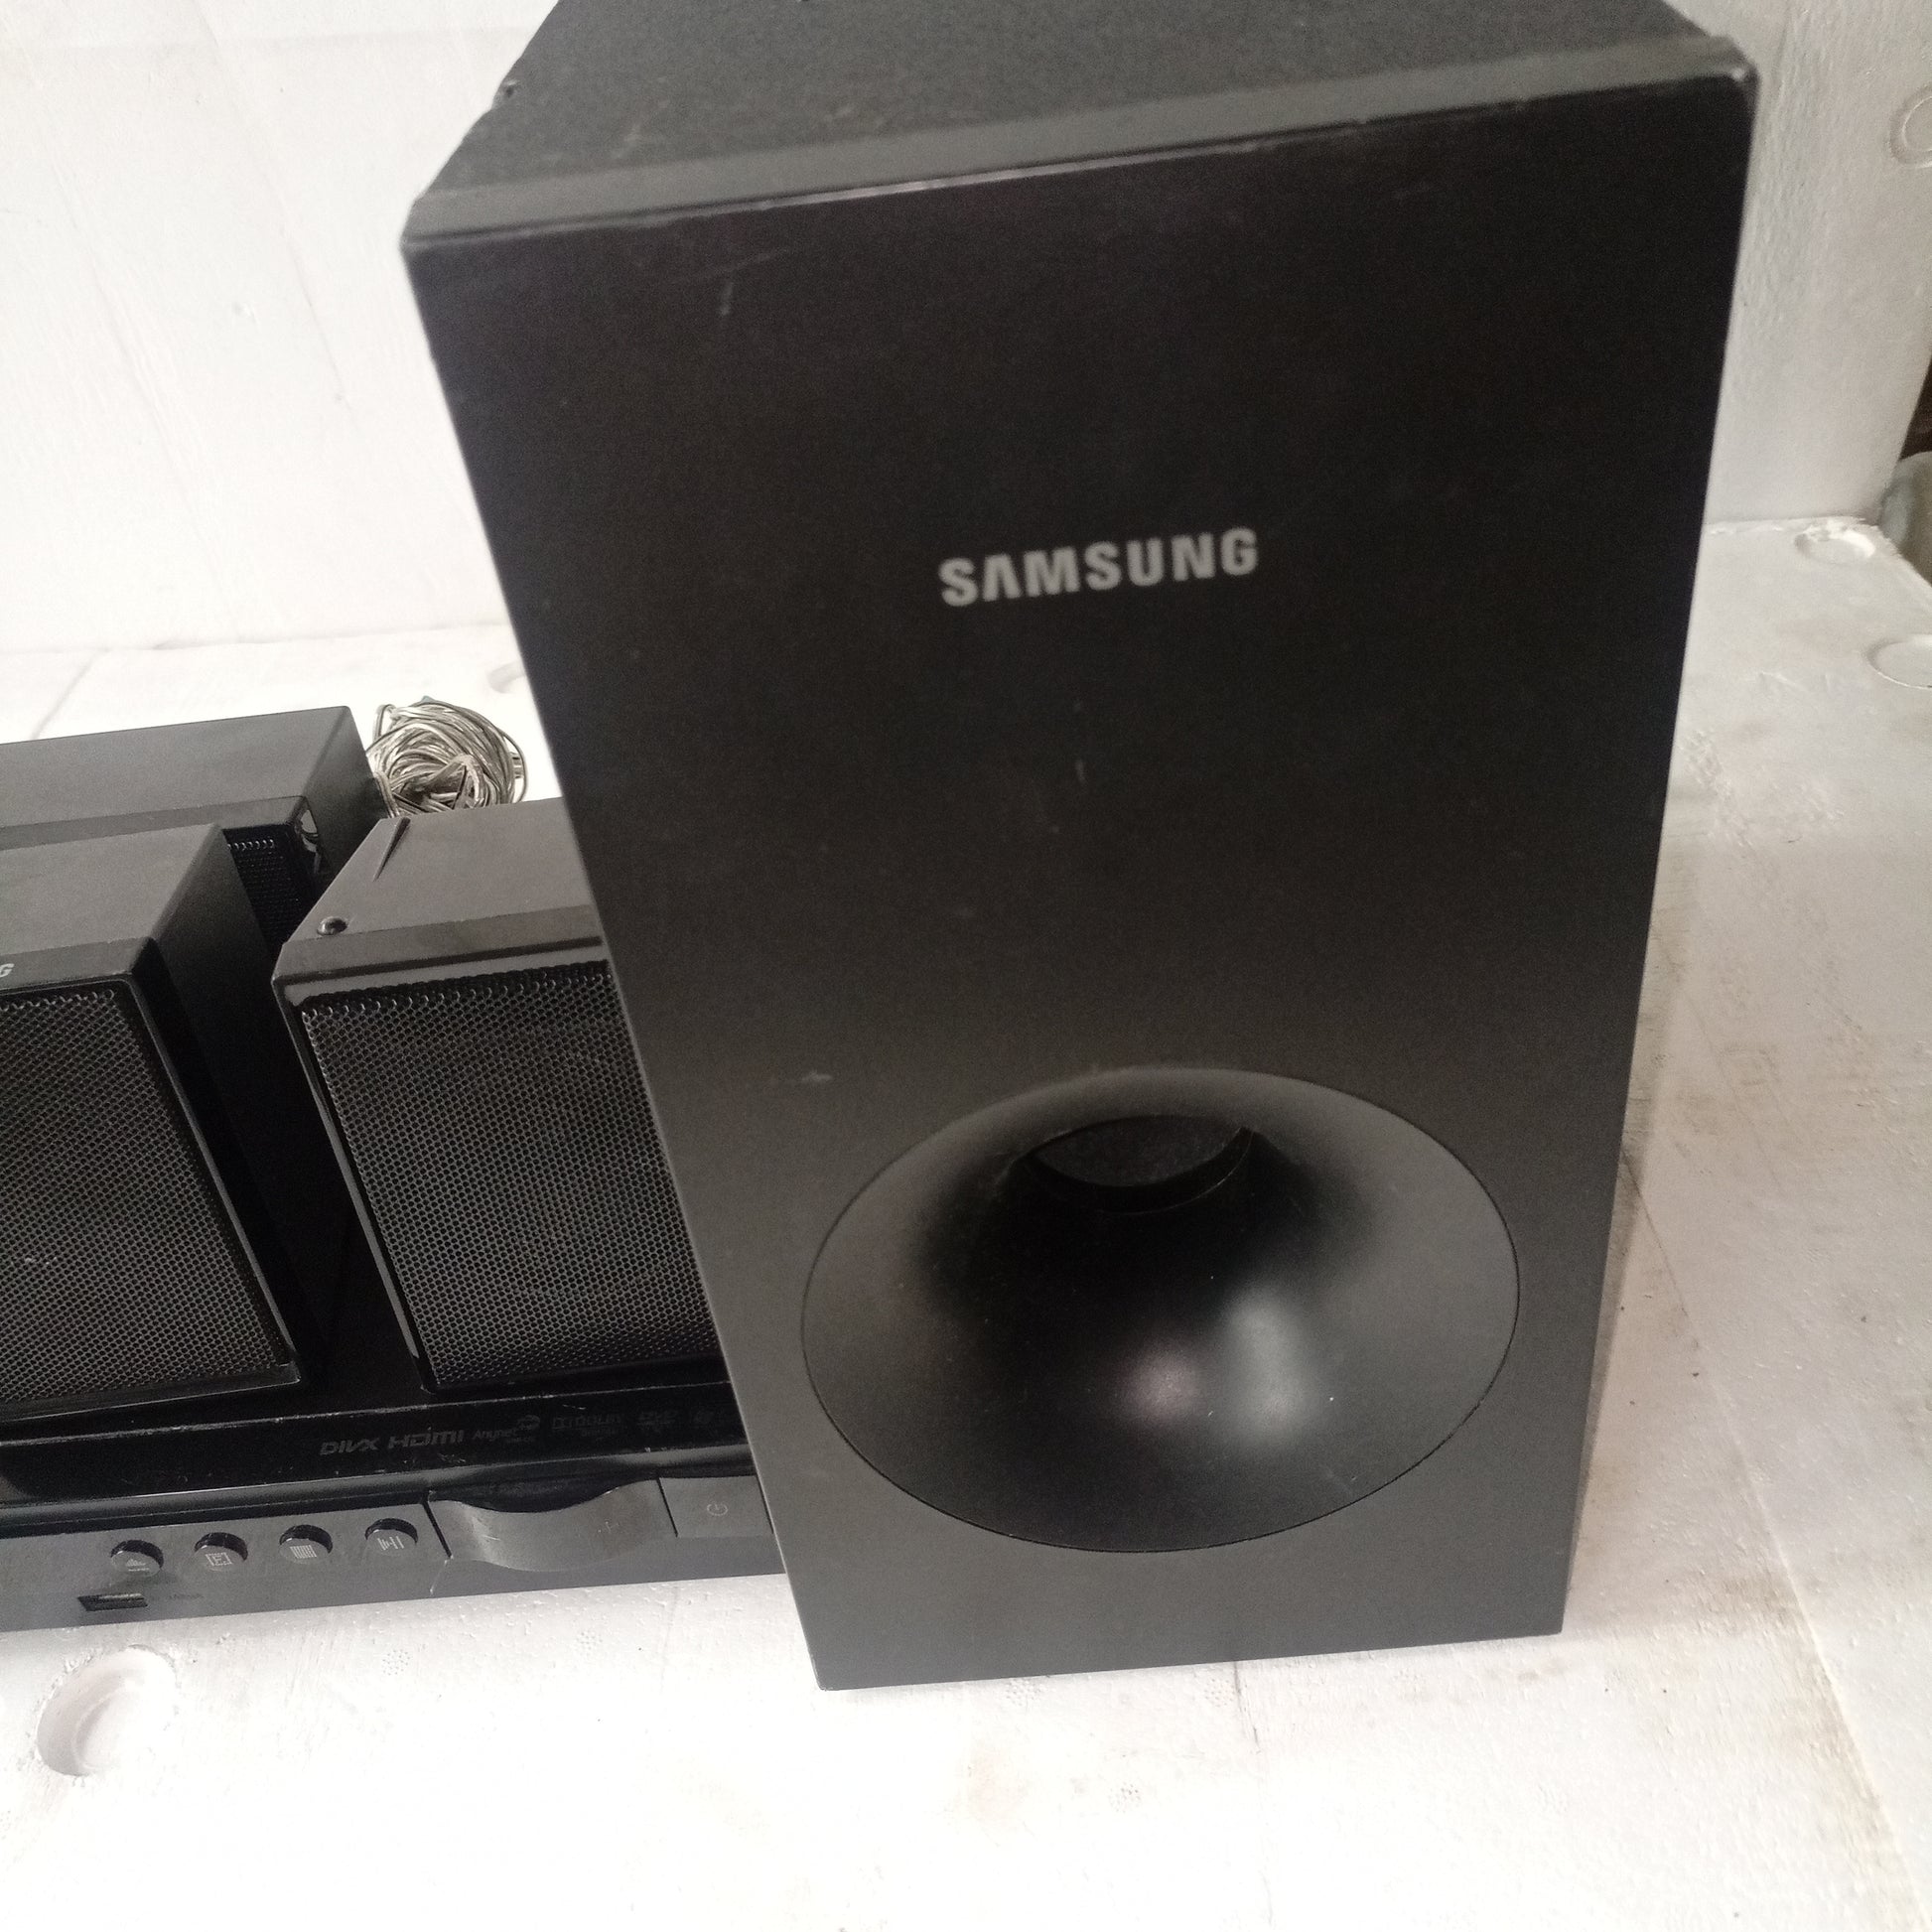 Samsung HT-E350 5.1Ch 350Watts DVD Home Theater Complete Set - subwoofer front view